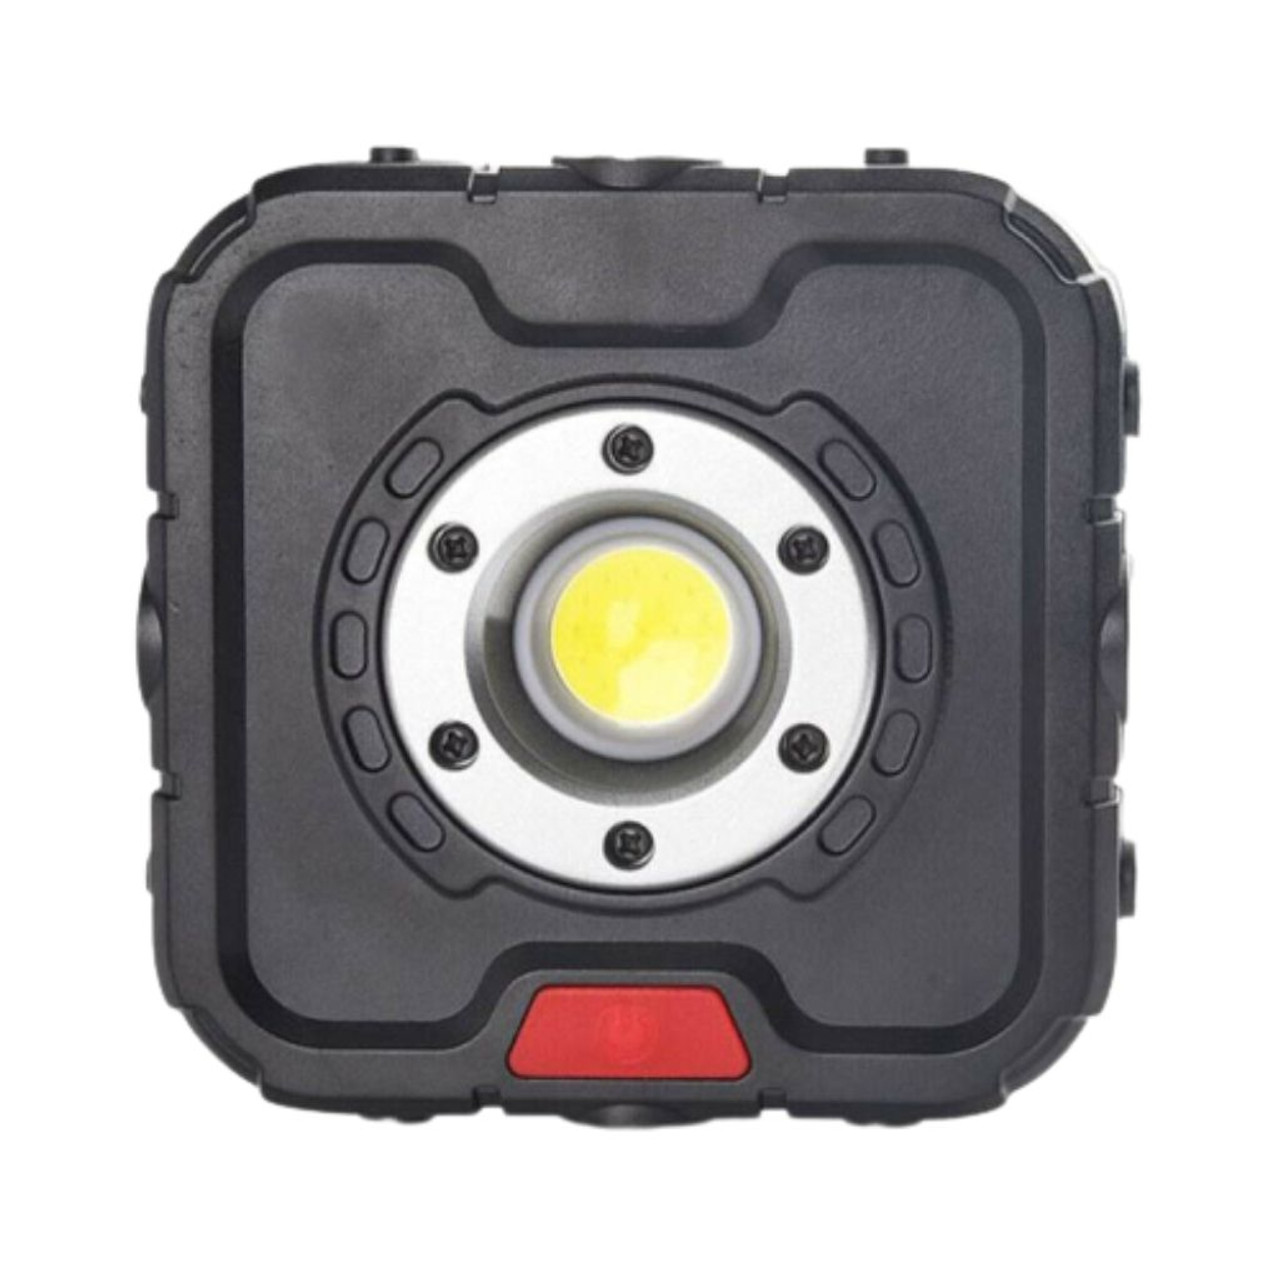 Multifunction Magnetic Portable LED Work Light with Magnet and Hook product image